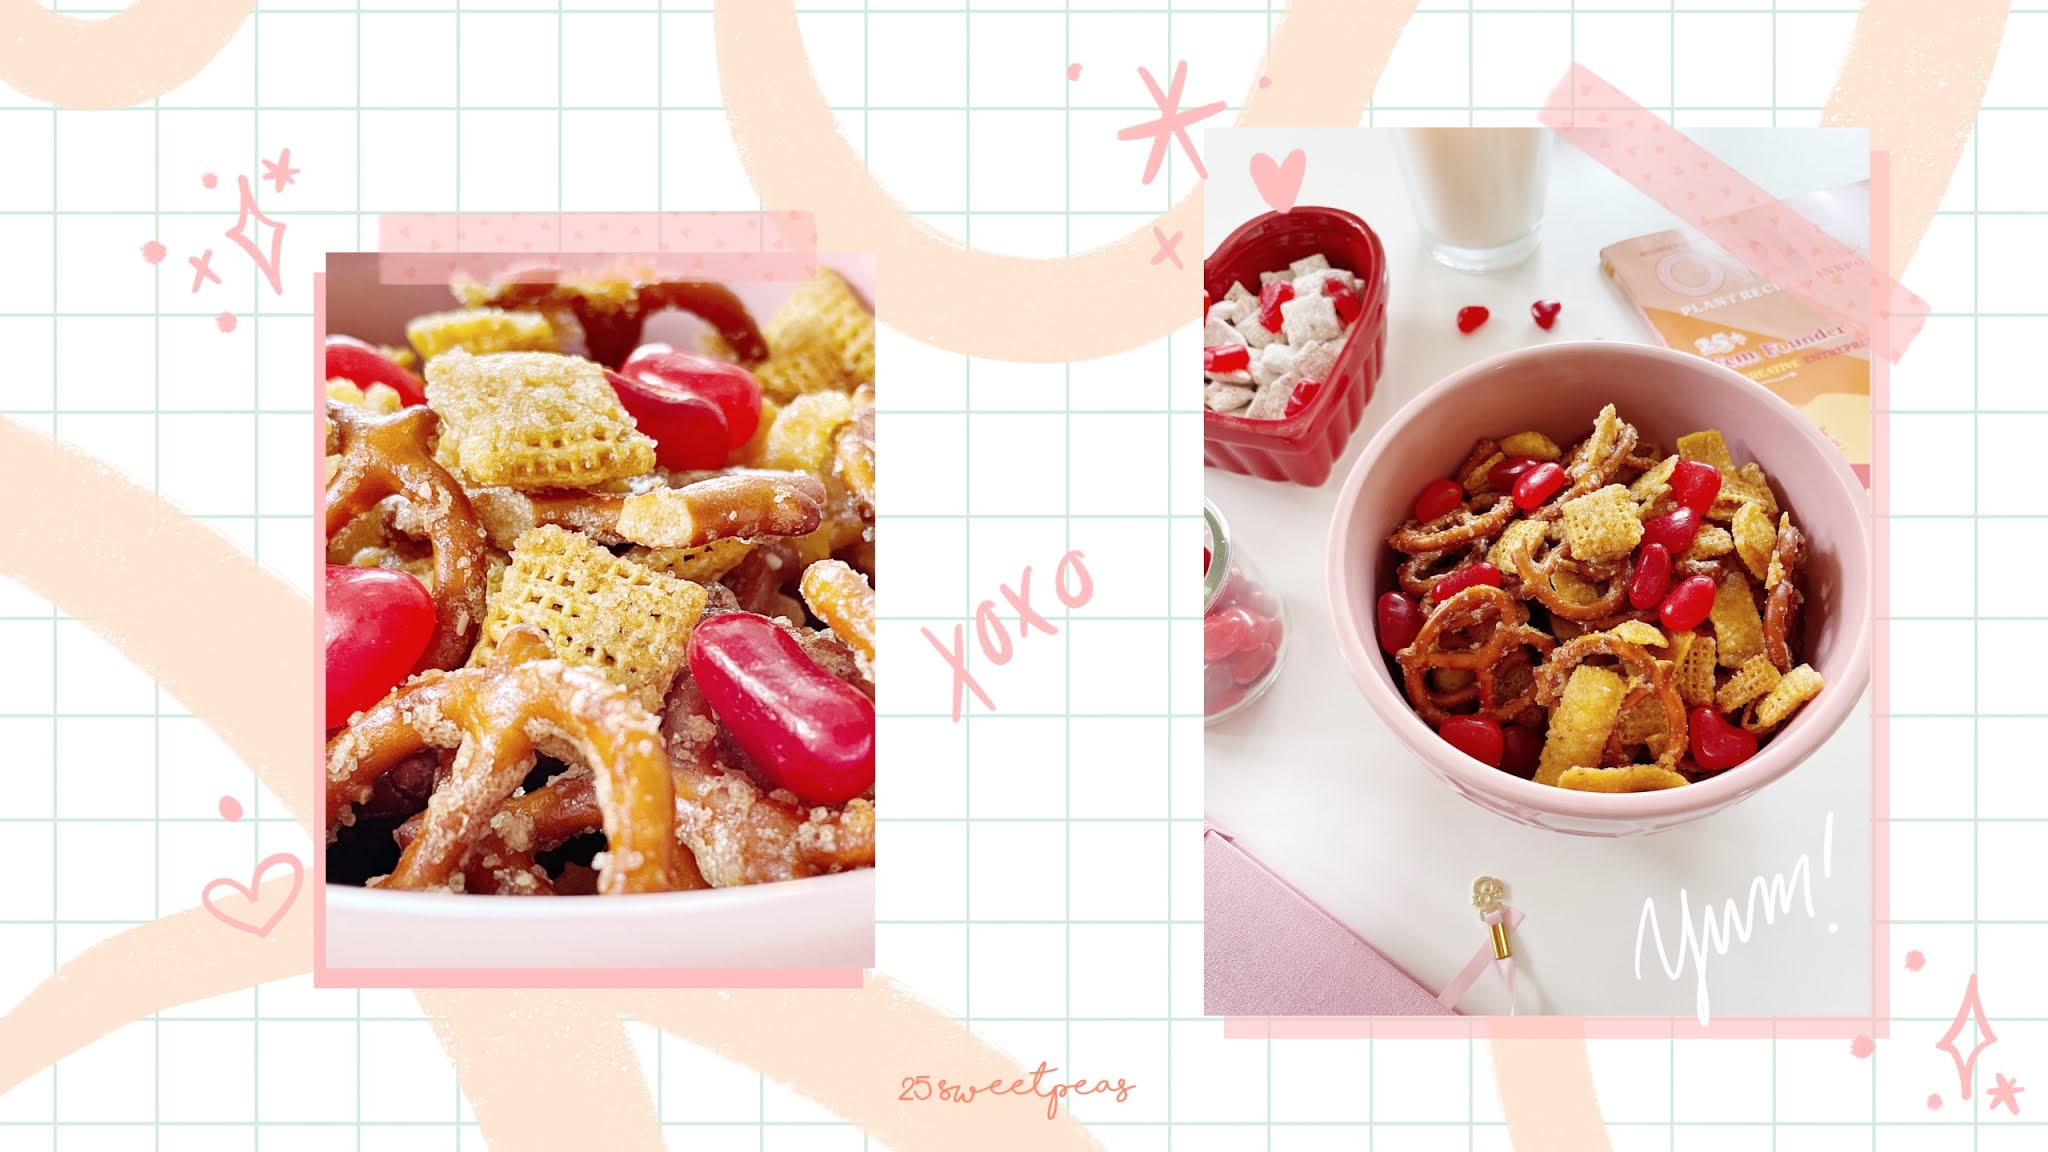 Snack Mixes For Valentines Day- 25 Sweetpeas